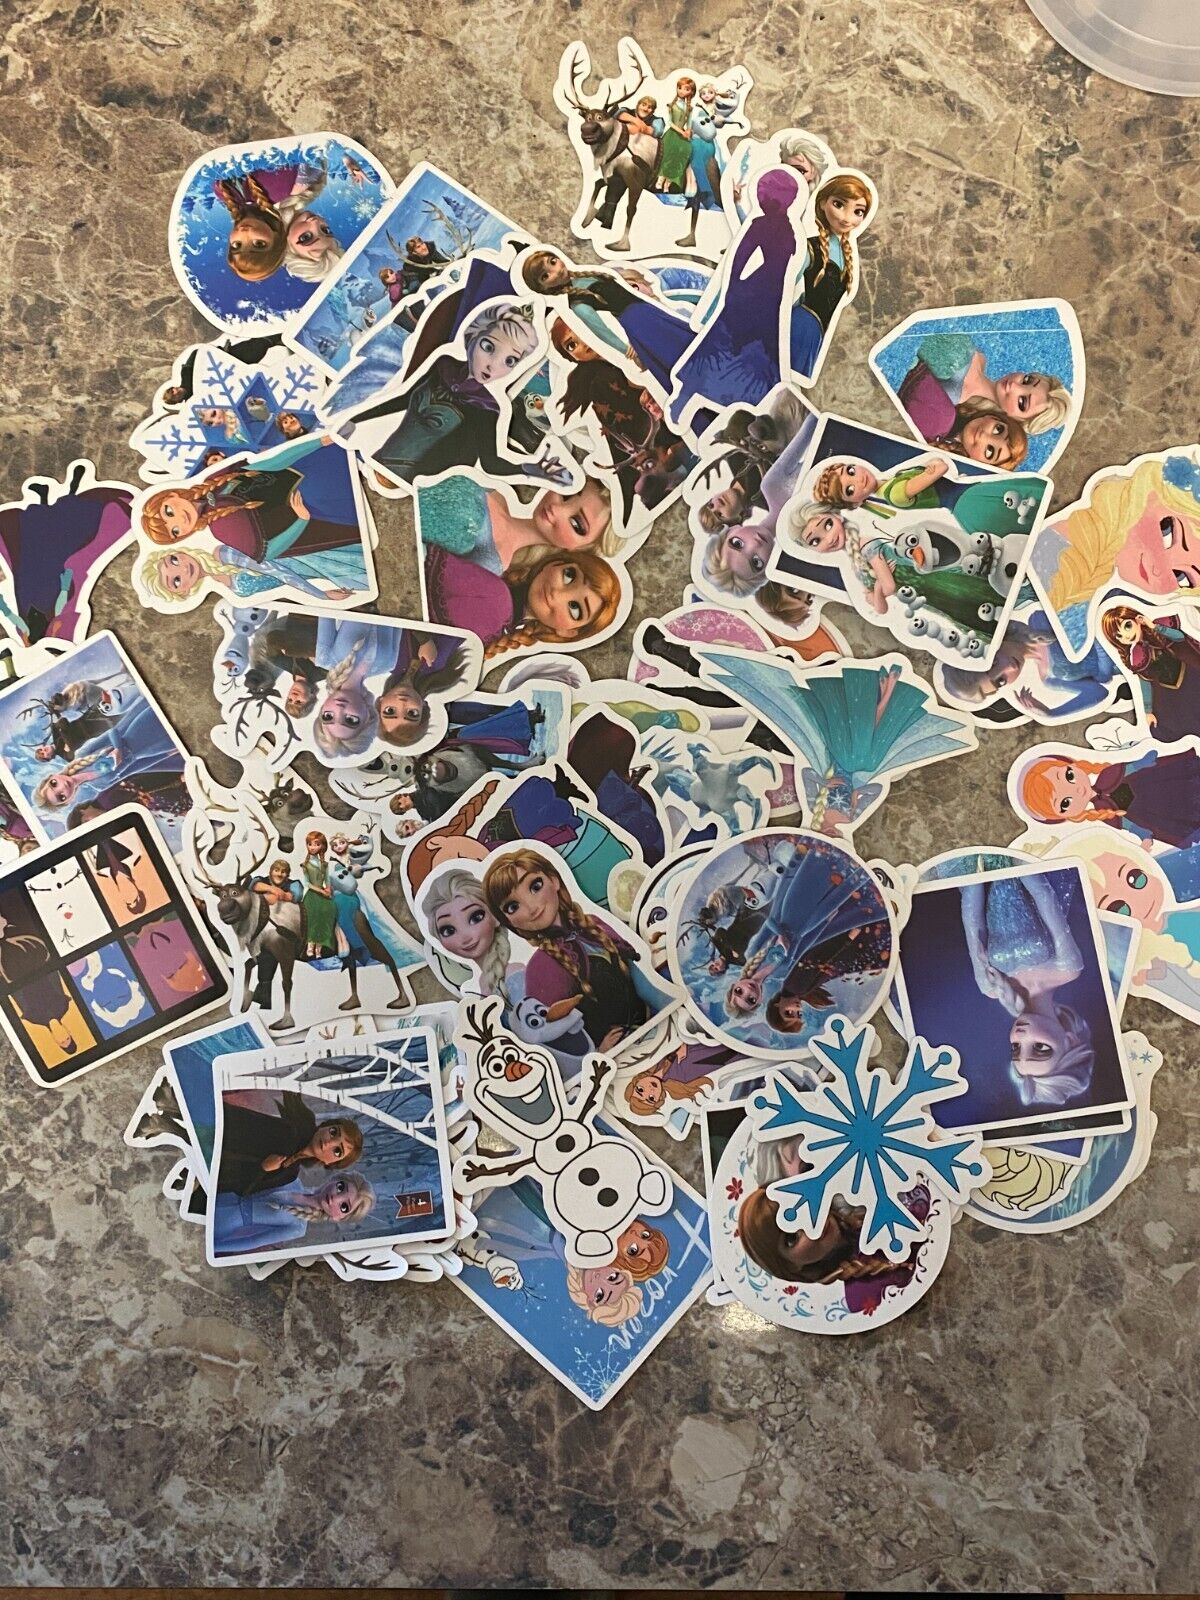 Lot of 50pc Disney Frozen Elsa Anna Stickers Assorted Sizes Designs. New